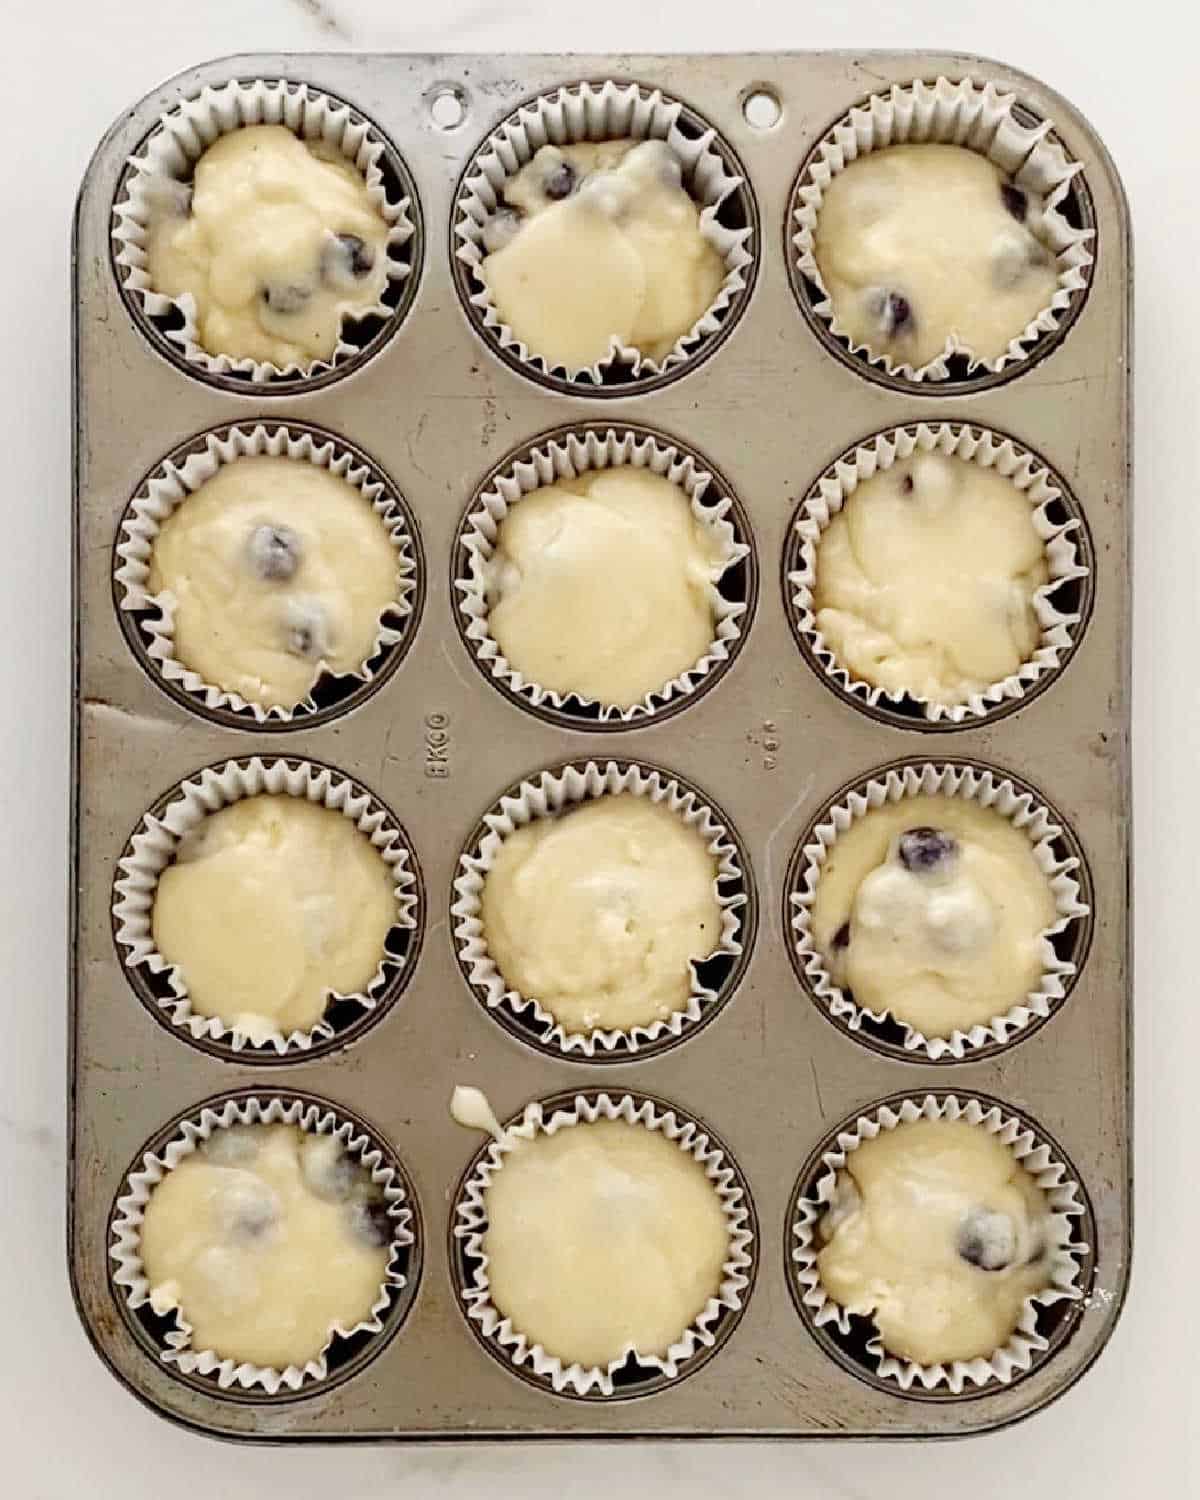 Muffin pan with blueberry muffin batter in paper liners. White marble surface.